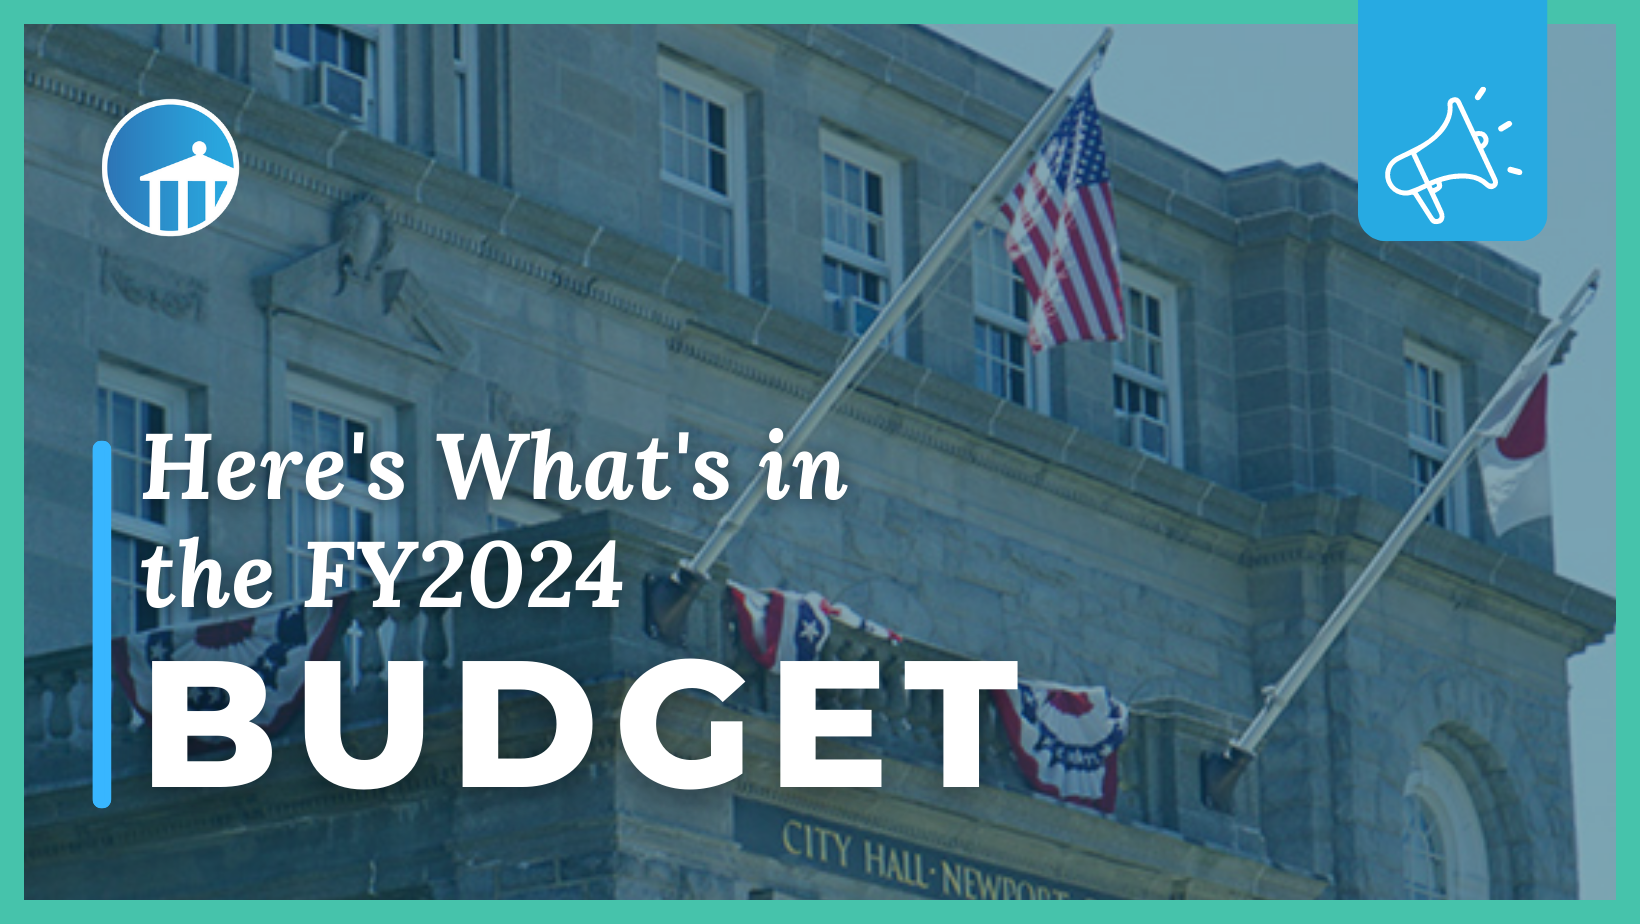 Here's What's in the FY2024 Budget